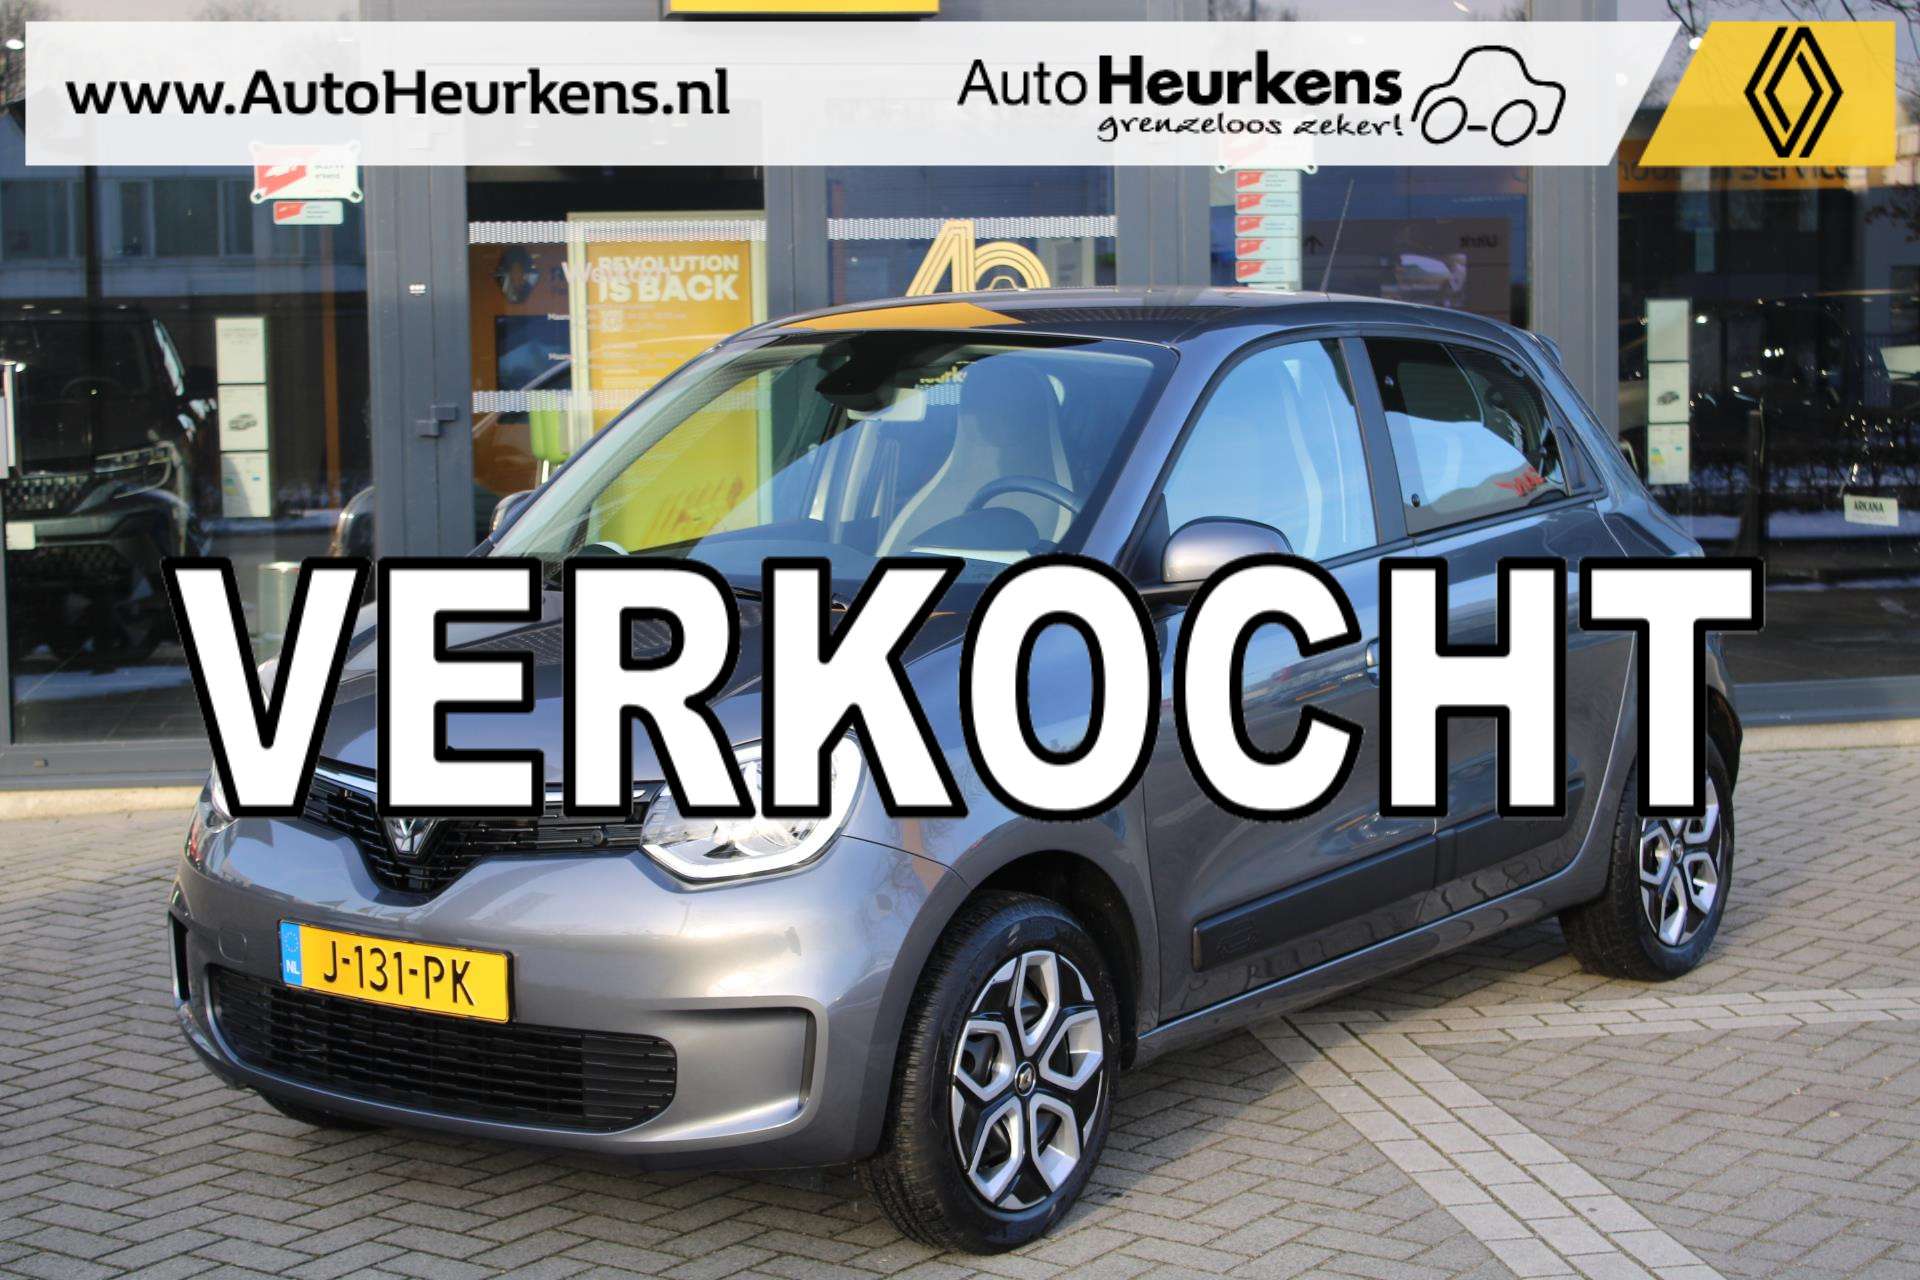 Renault Twingo Compact in Grey used in WEERT for € 1.-